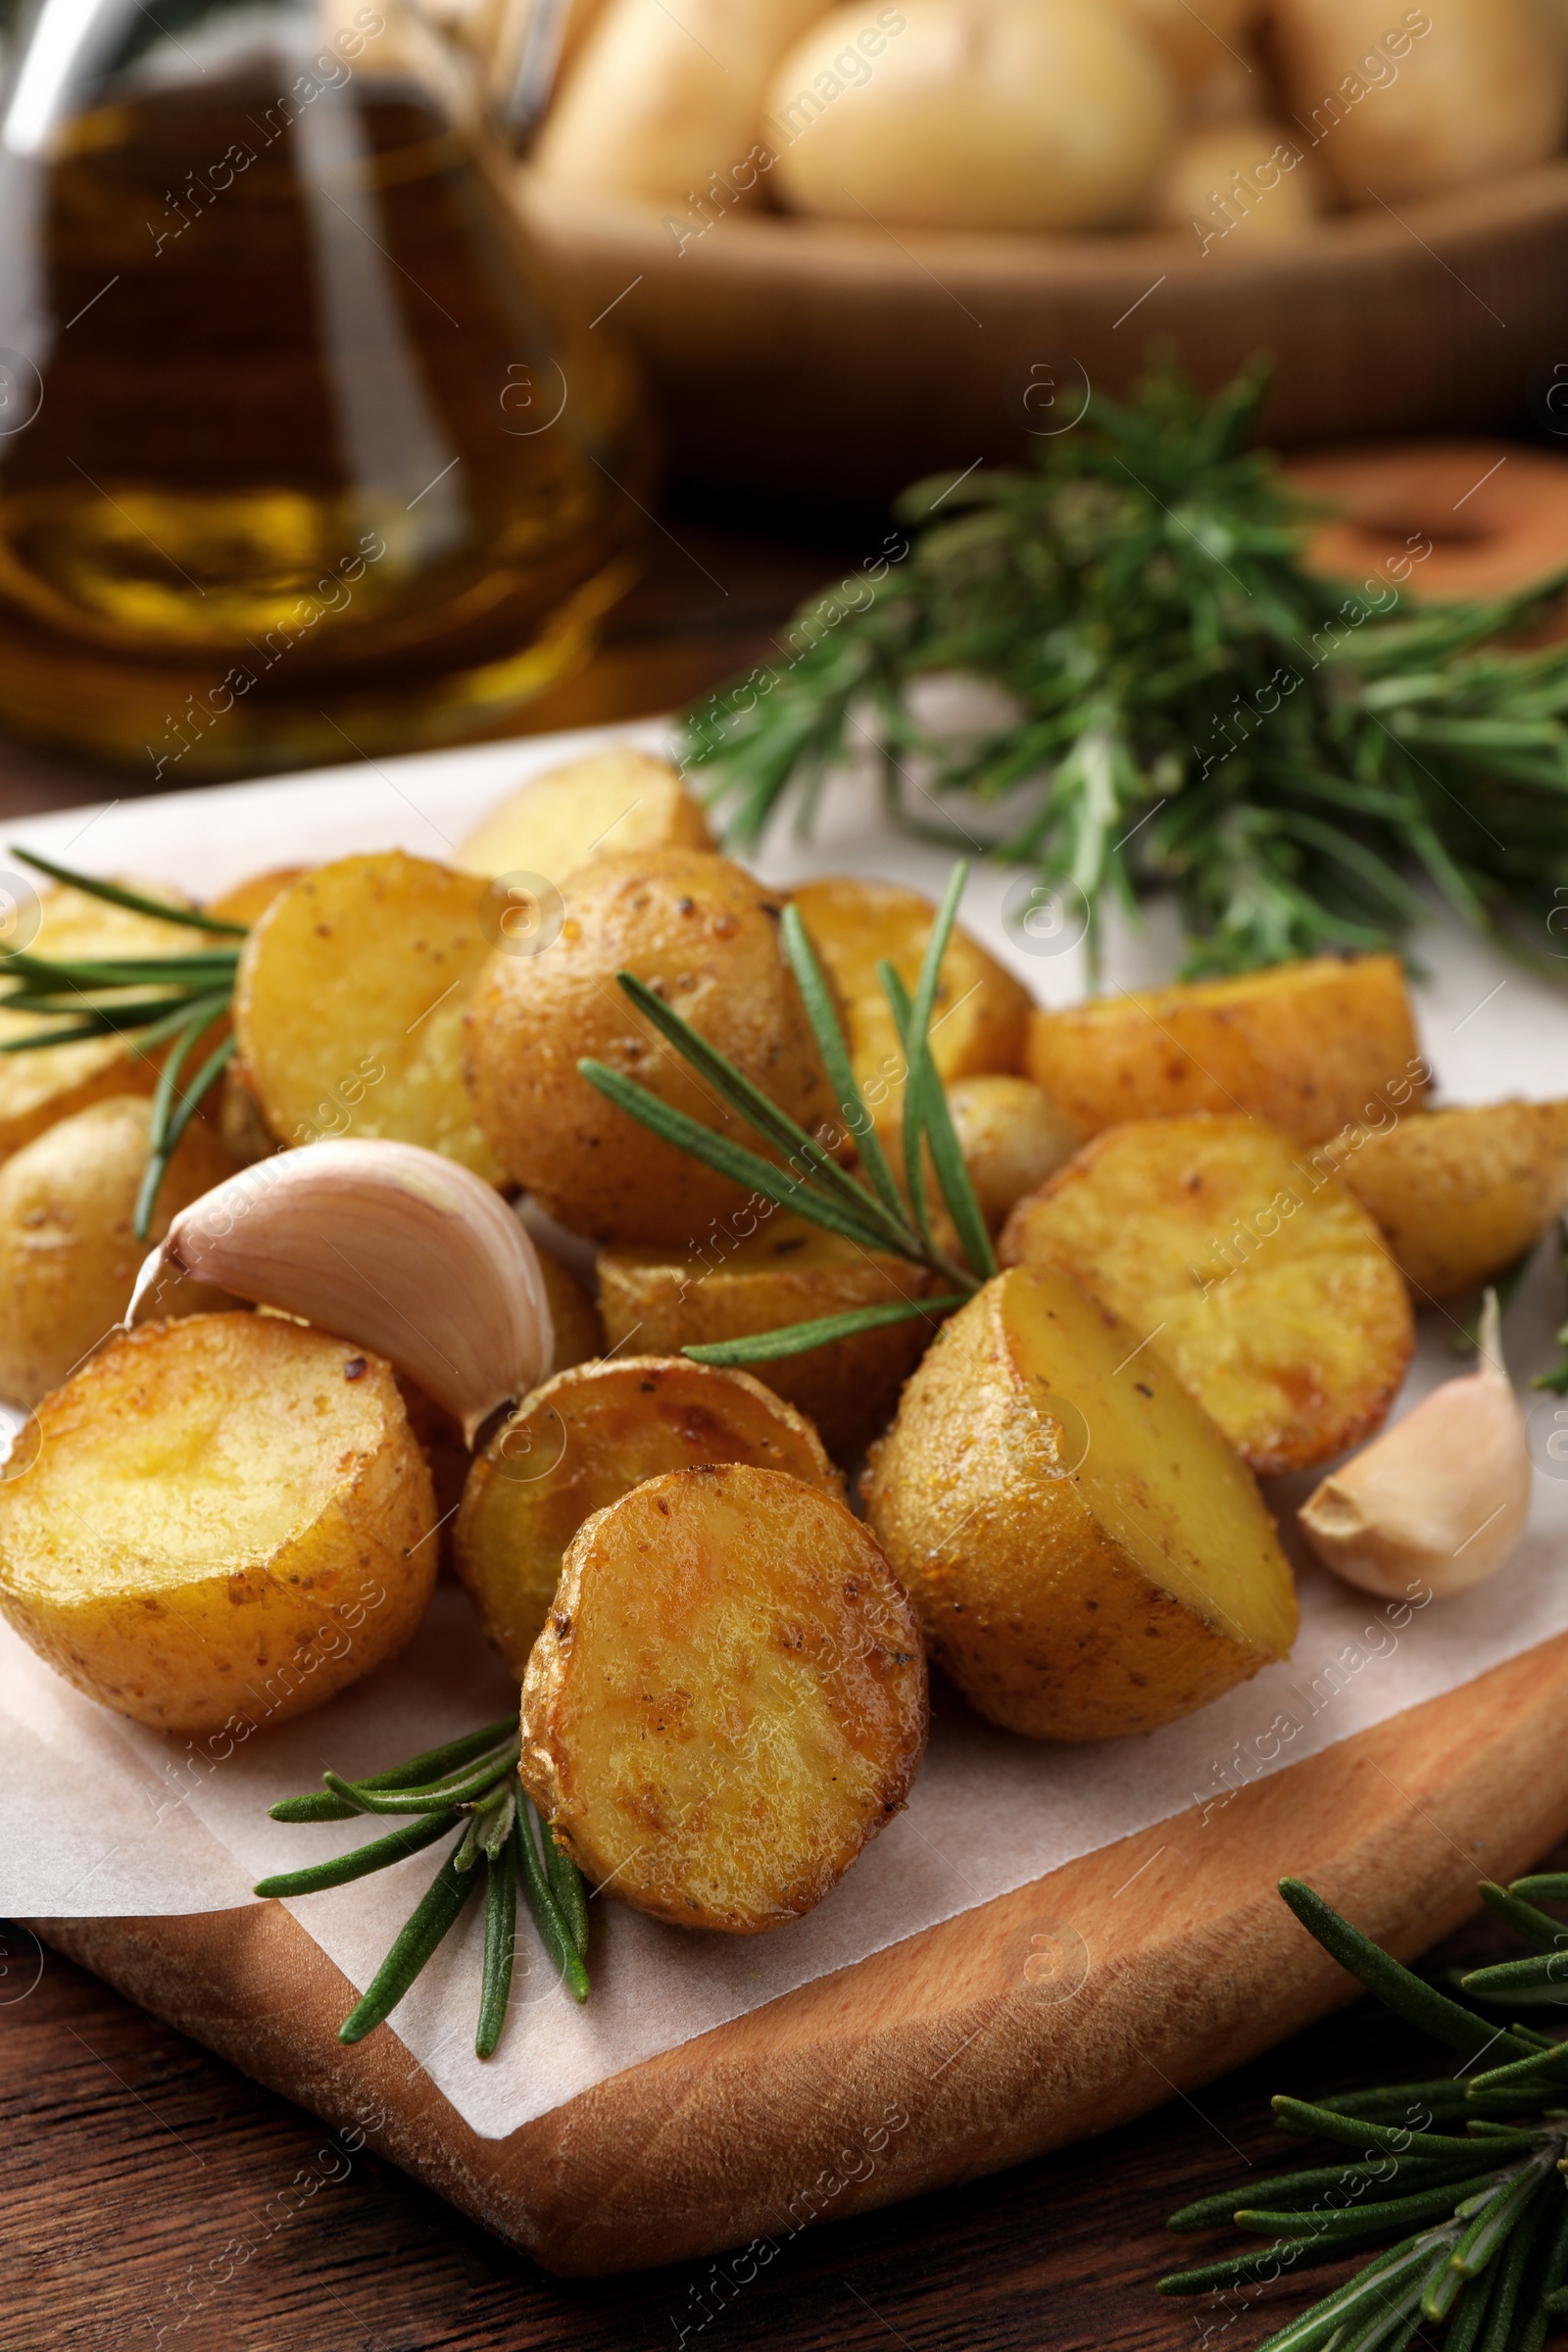 Photo of Delicious baked potatoes with rosemary and garlic on parchment paper, closeup